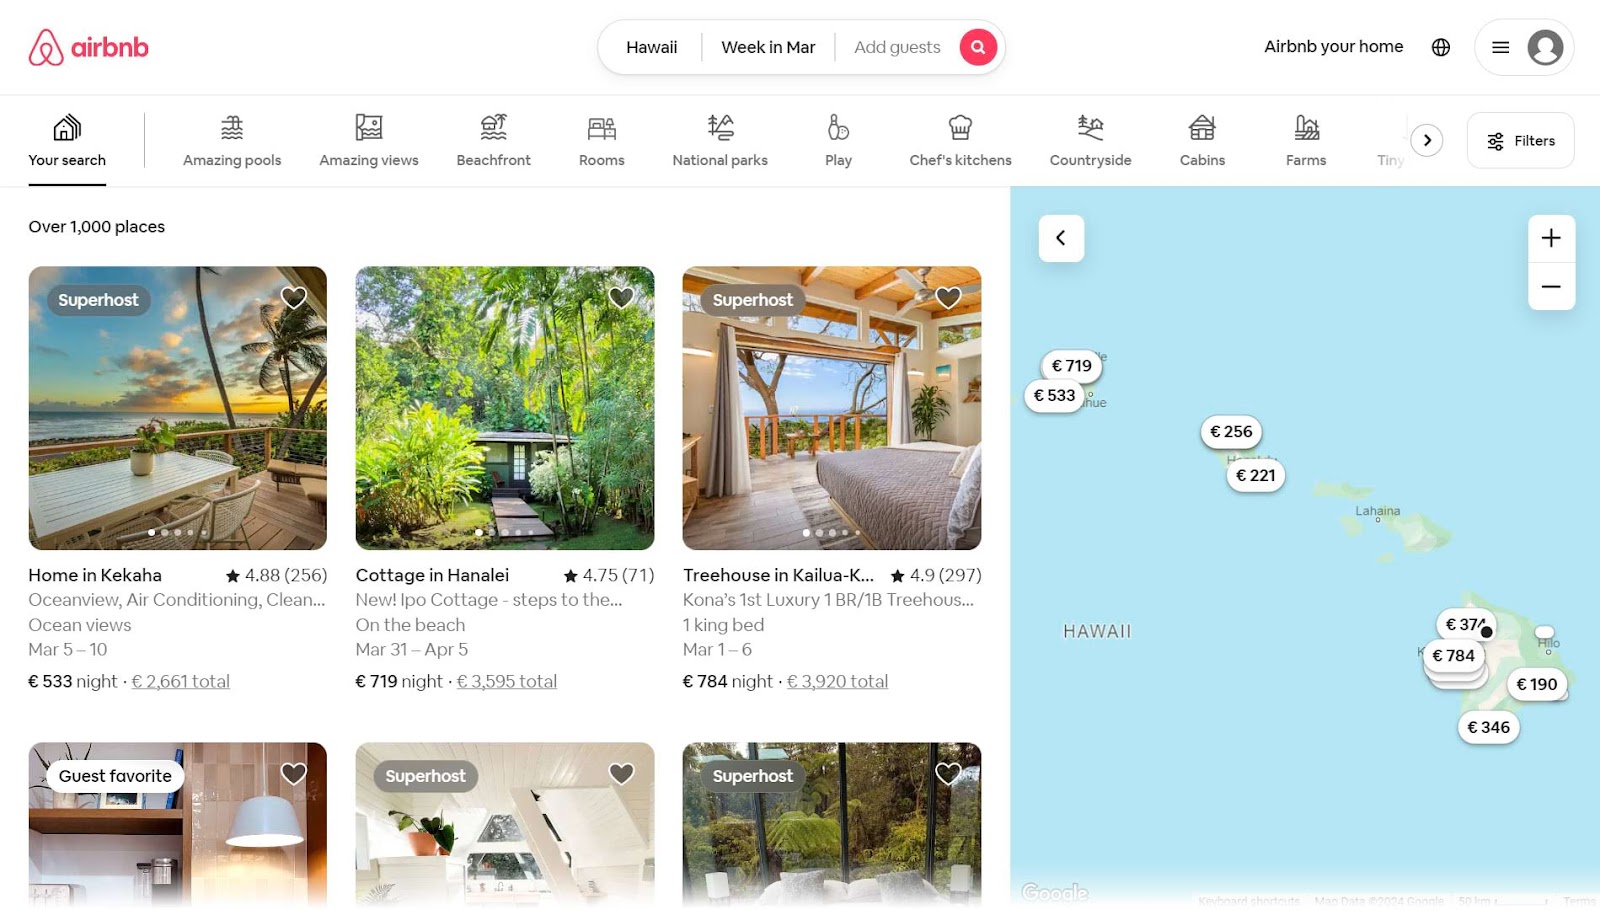 Airbnb's "Your search" page